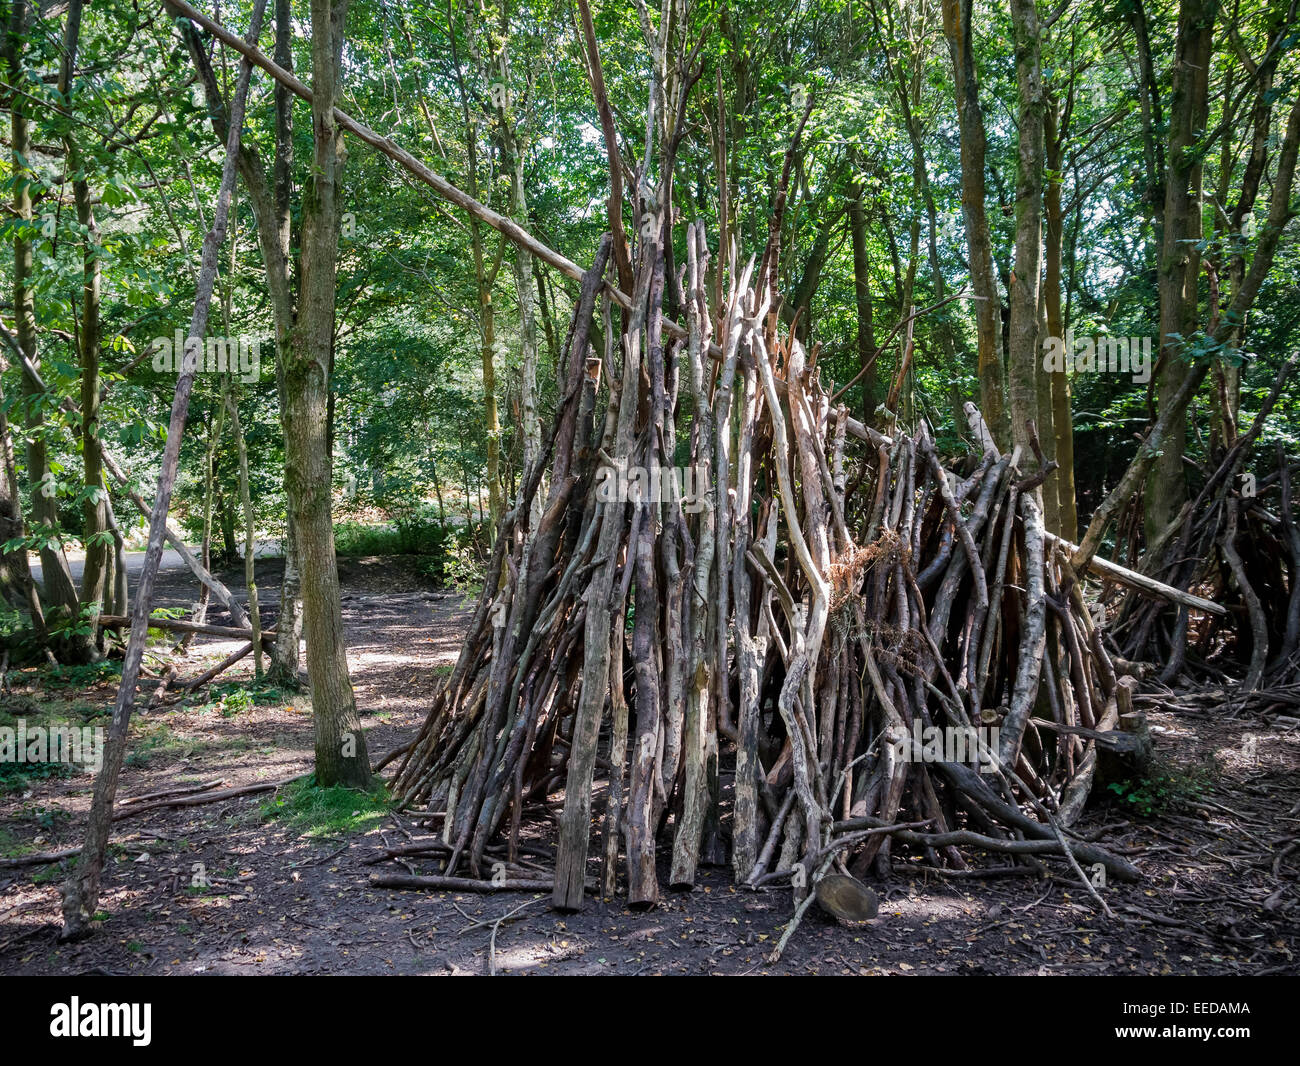 A Debris hut built for shelter in the wilderness Stock Photo